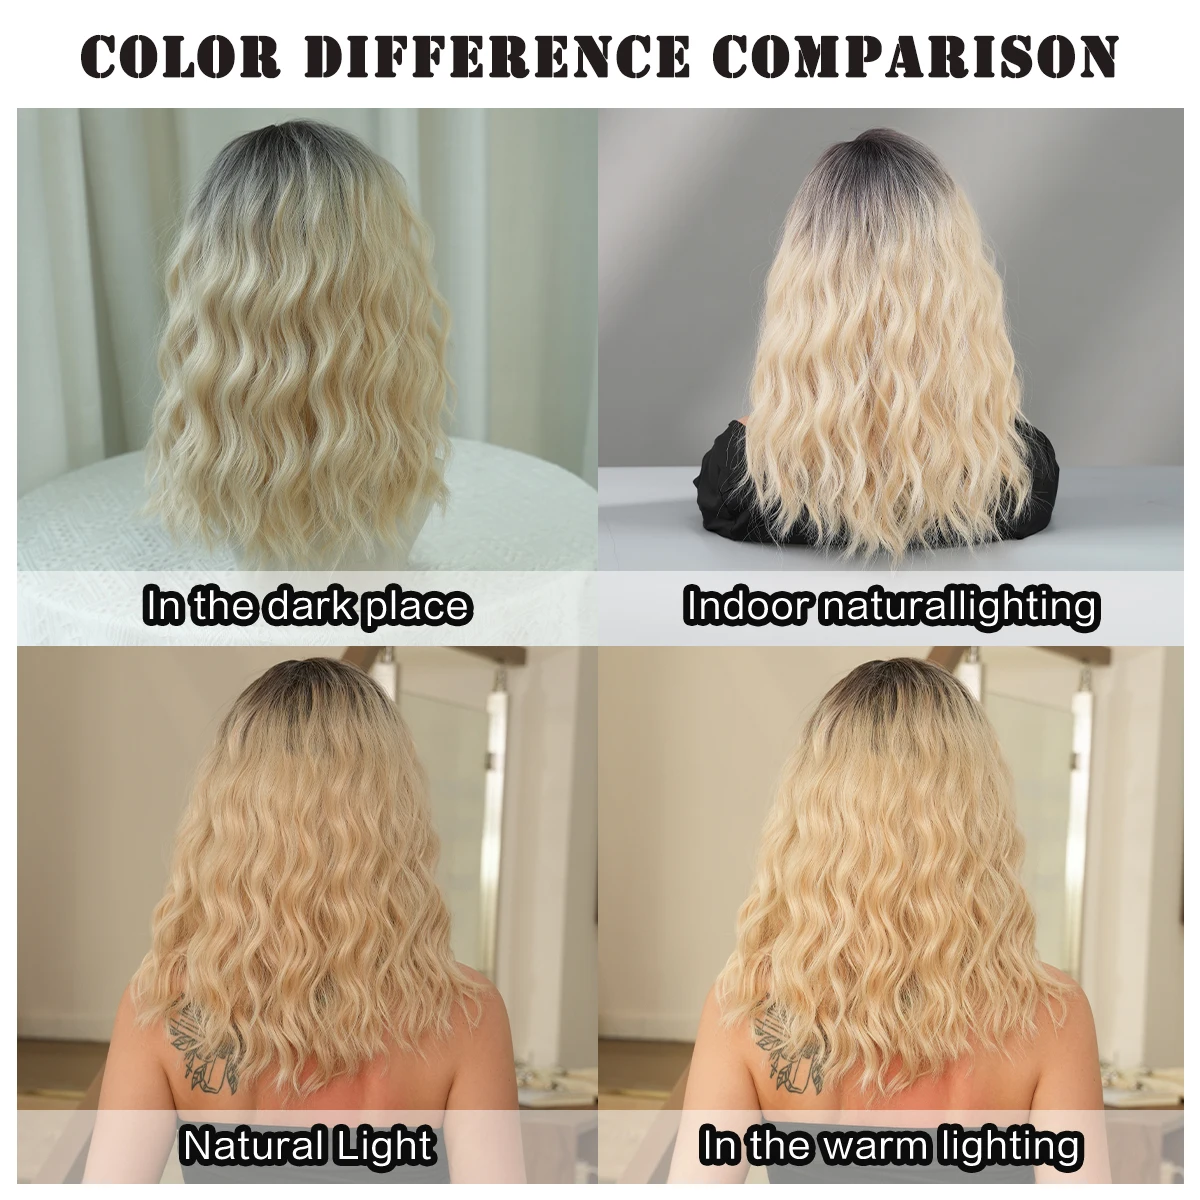 7JHH WIGS Routine Wigs Shoulder Length Water Wave Ombre Blonde Wigs with Dark Roots Fluffy High Density Synthetic Hair Wig